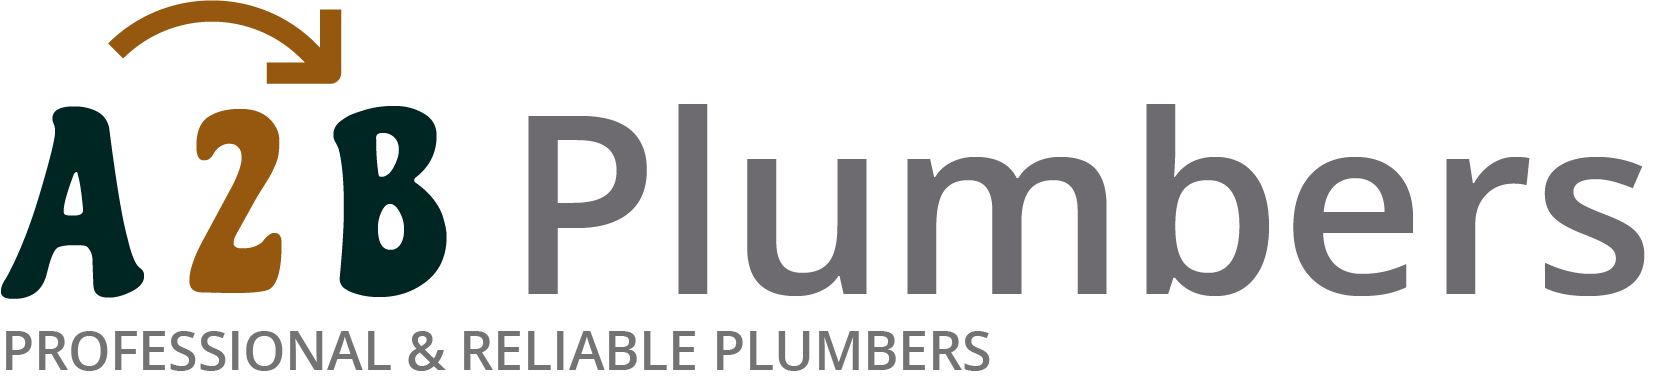 If you need a boiler installed, a radiator repaired or a leaking tap fixed, call us now - we provide services for properties in Pentonville and the local area.